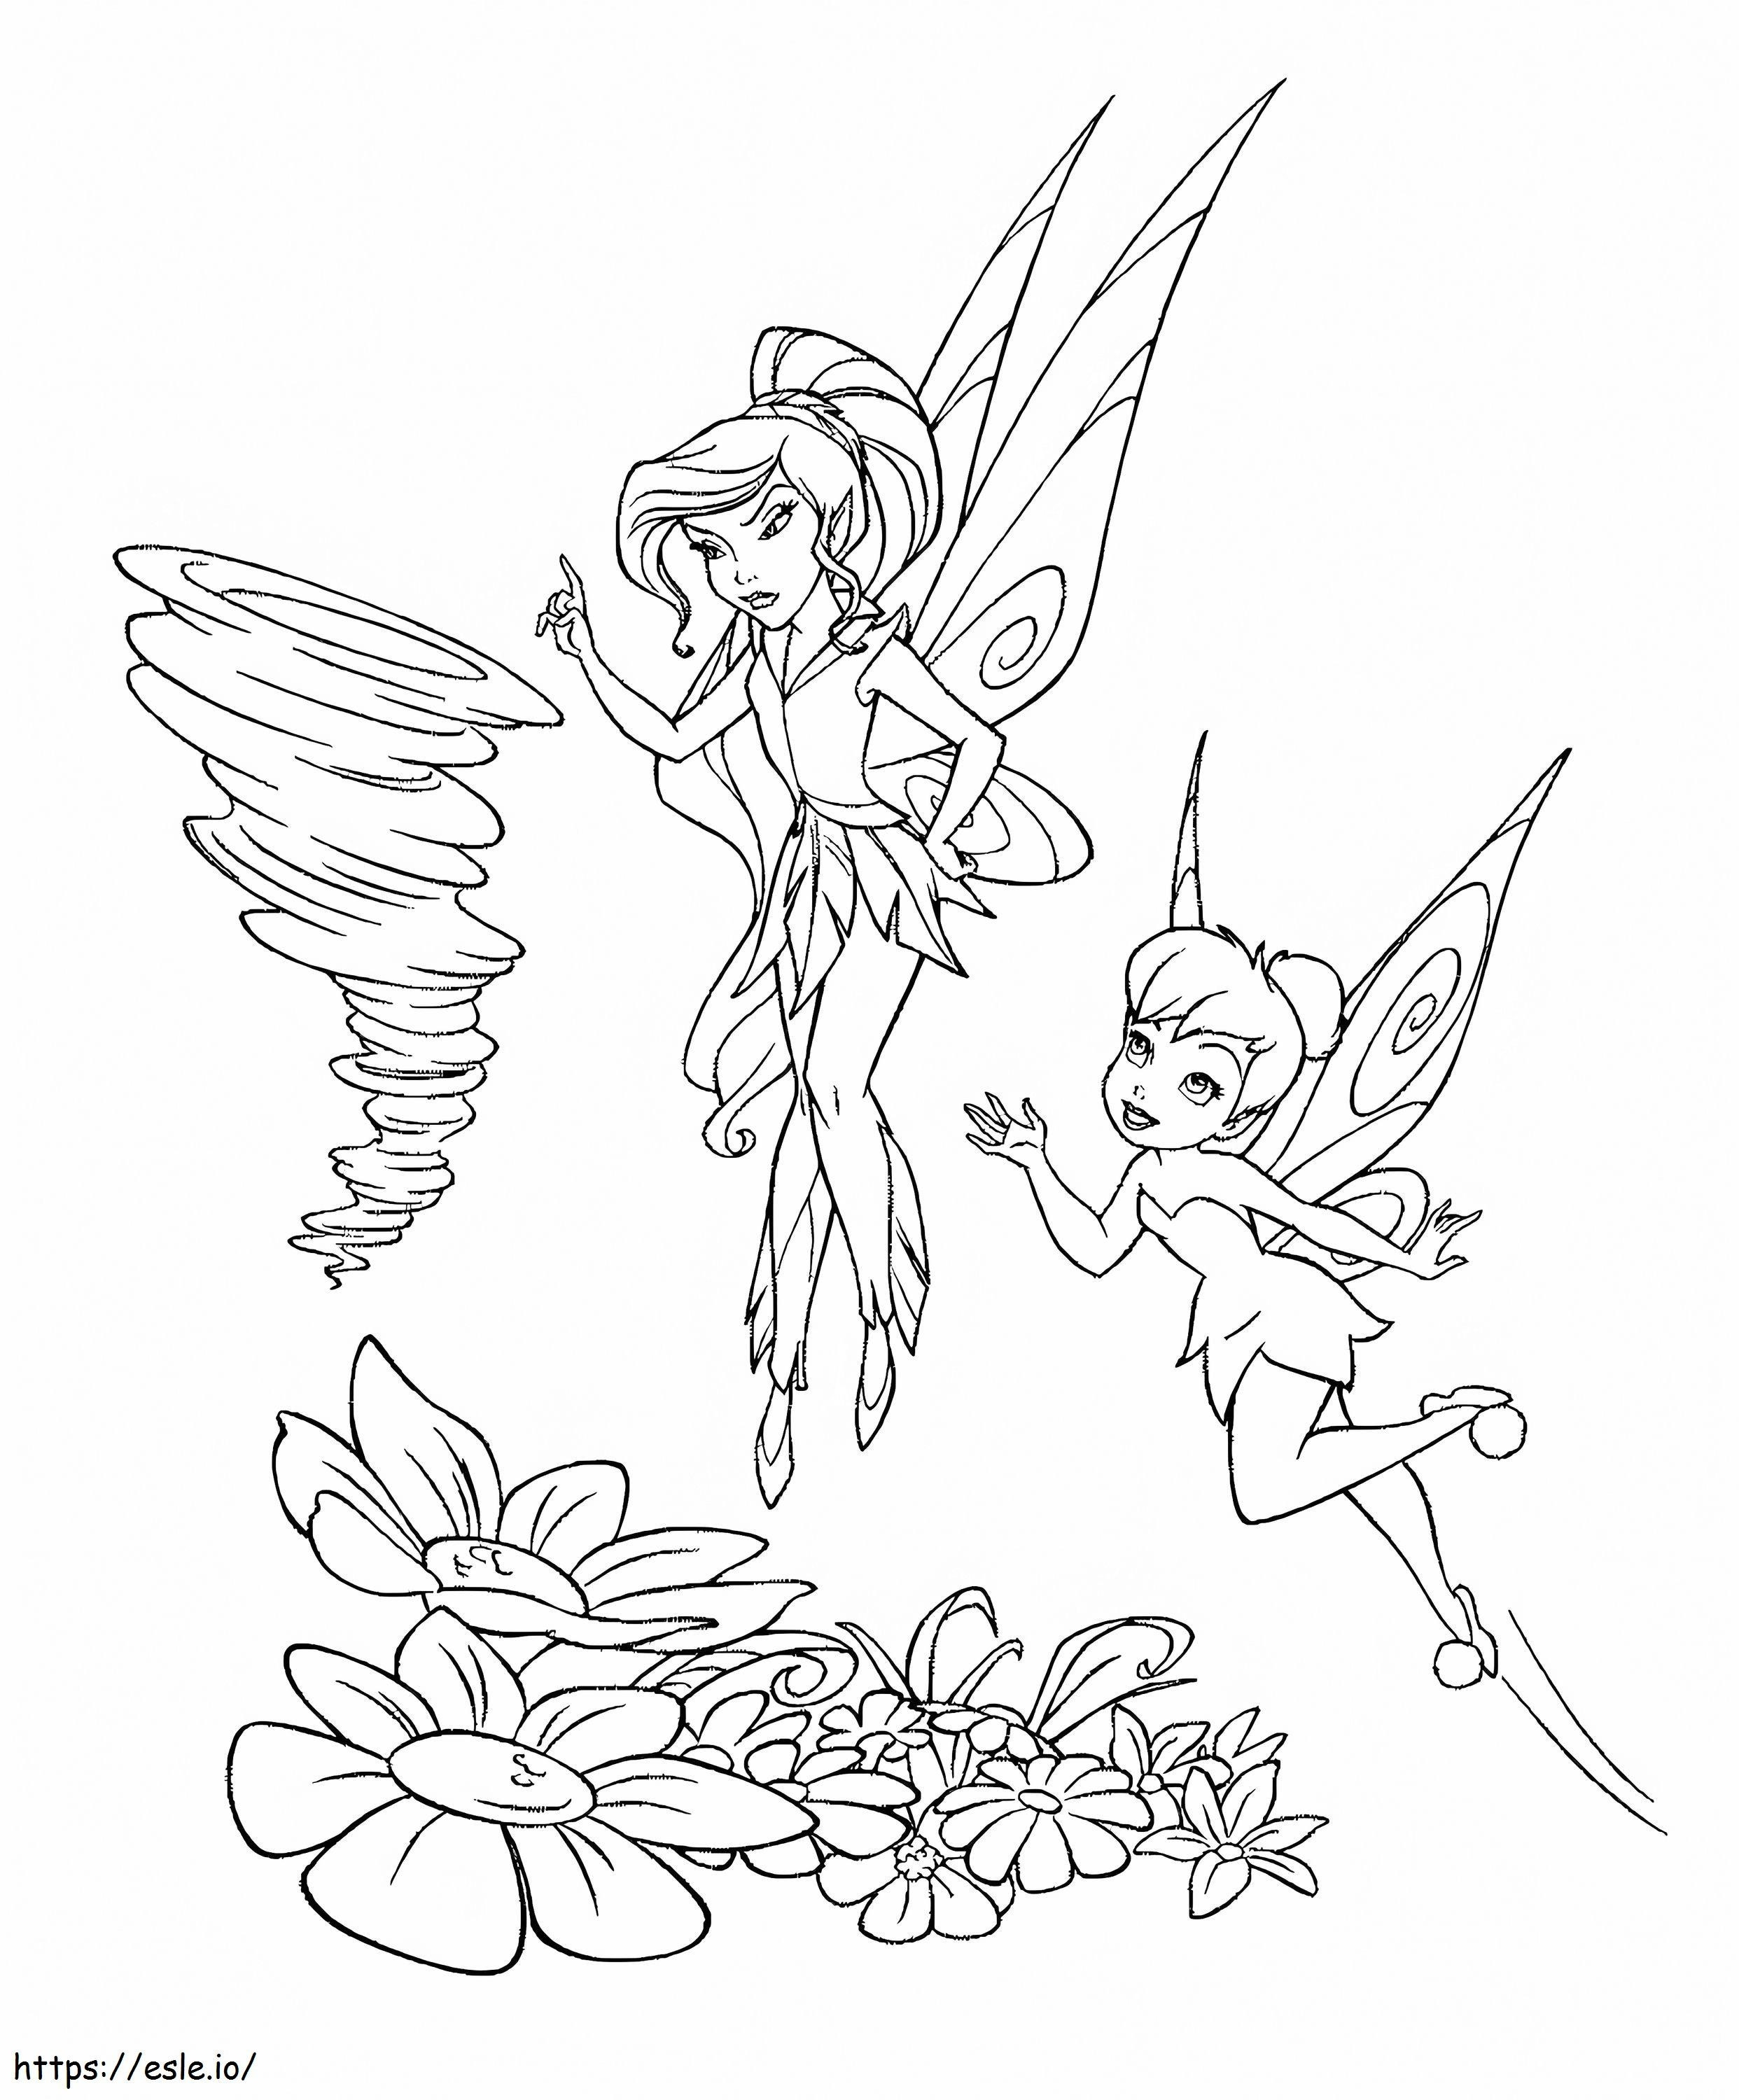 Disney Fairies coloring page